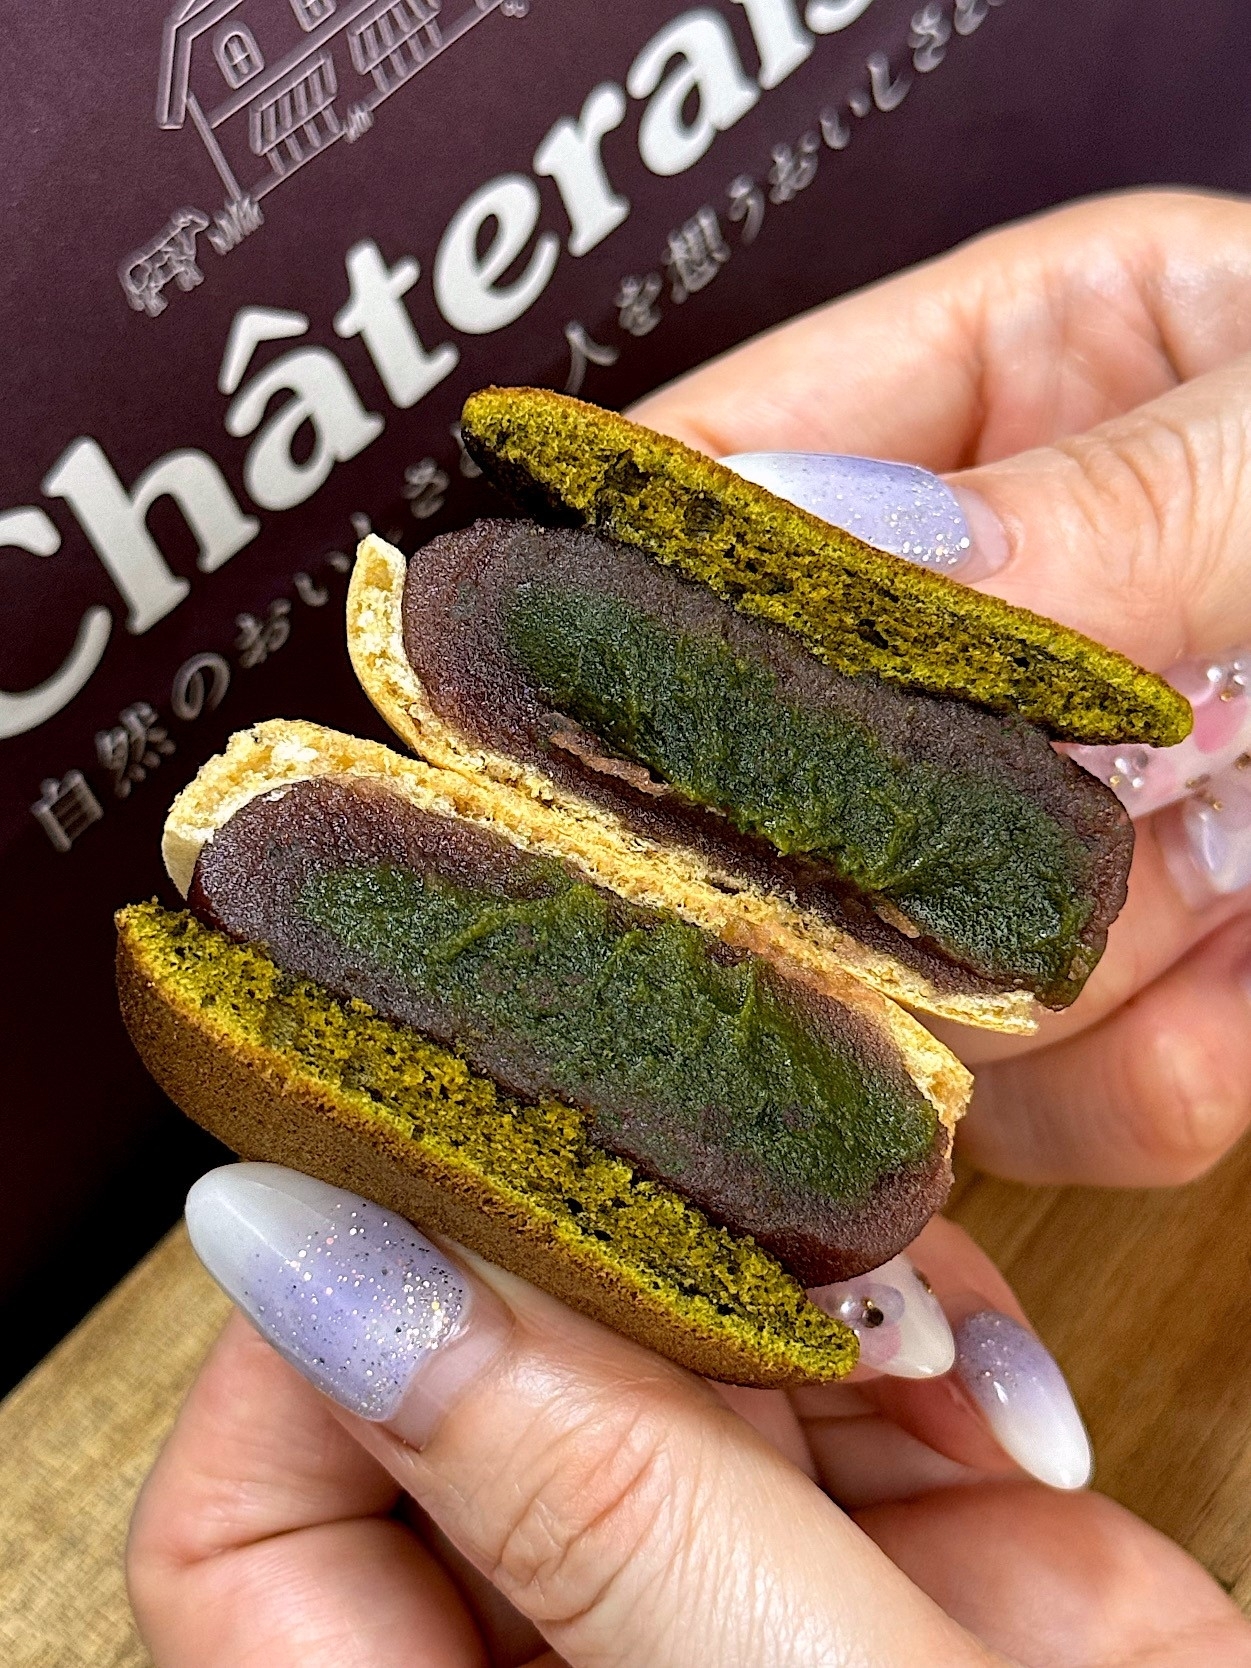 Person holding a matcha-flavored snack with a green tea filling